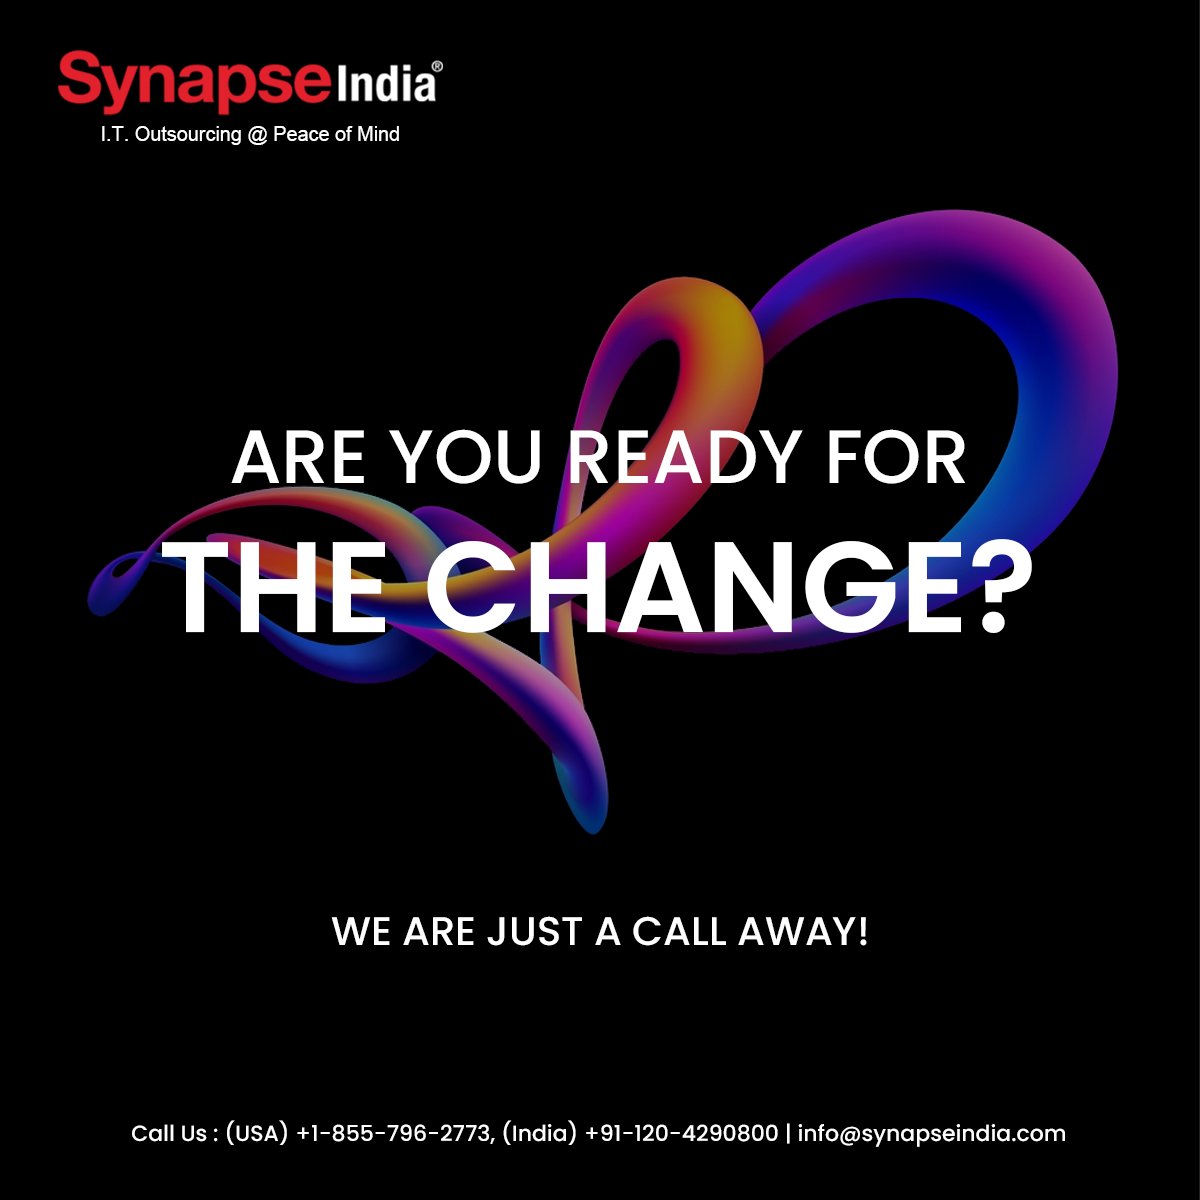 Embark on a journey of digital evolution with our expertise by your side.

📞 Give us a call at:
+1-855-796-2773 (USA)
+91-120-4290800 (India)

#digitaltransformation #digitaljourney #collaborativesuccess #technology #synapseindia